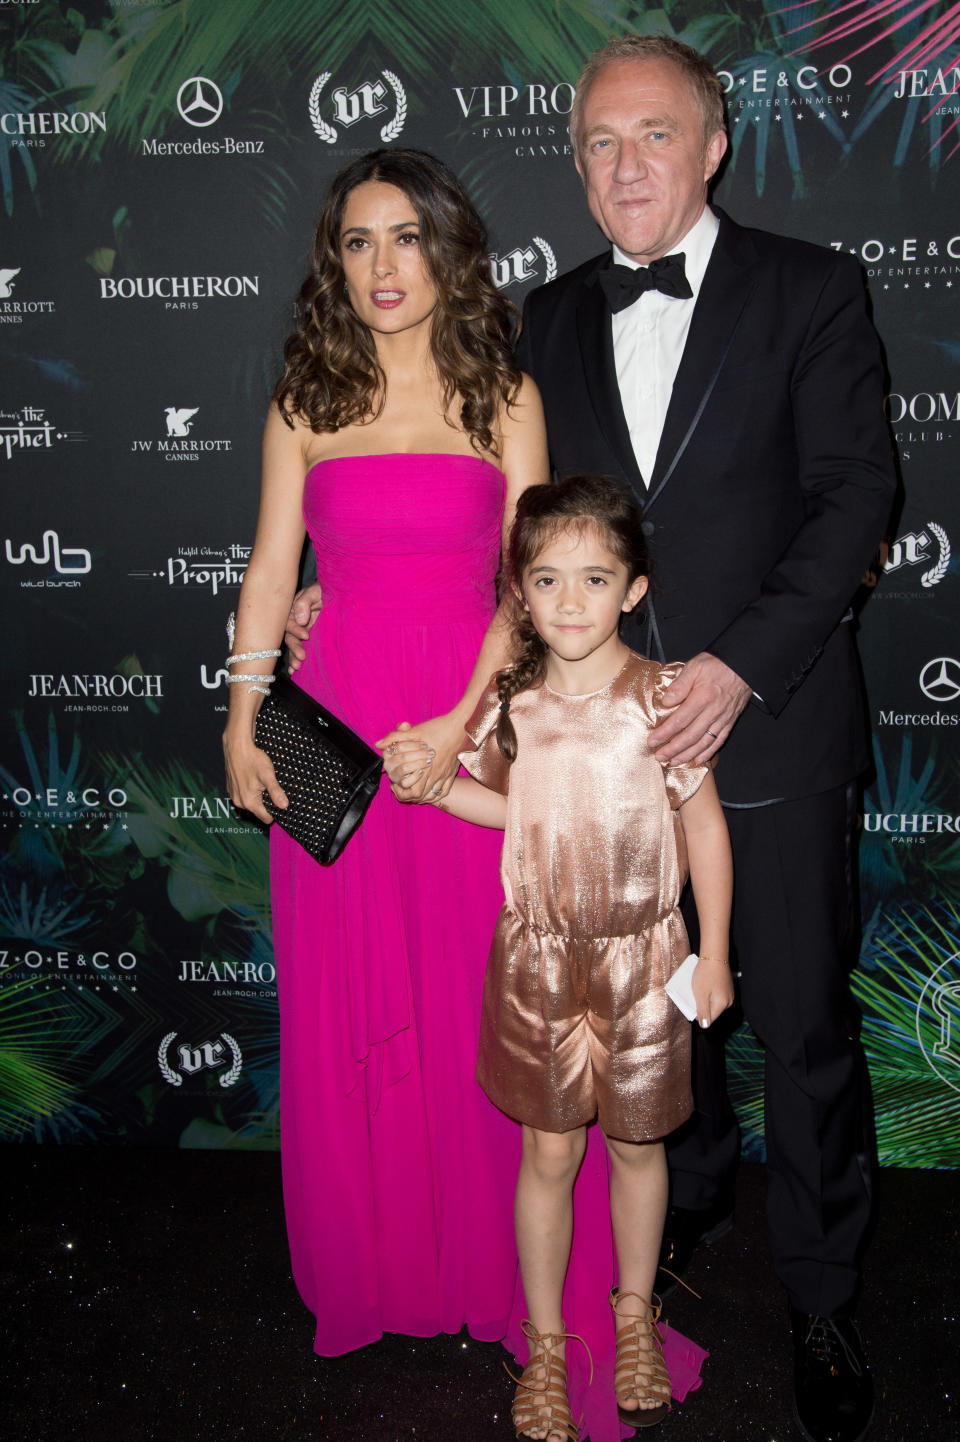 Salma Hayek and Francois Pinault with daughter Valentina at the 